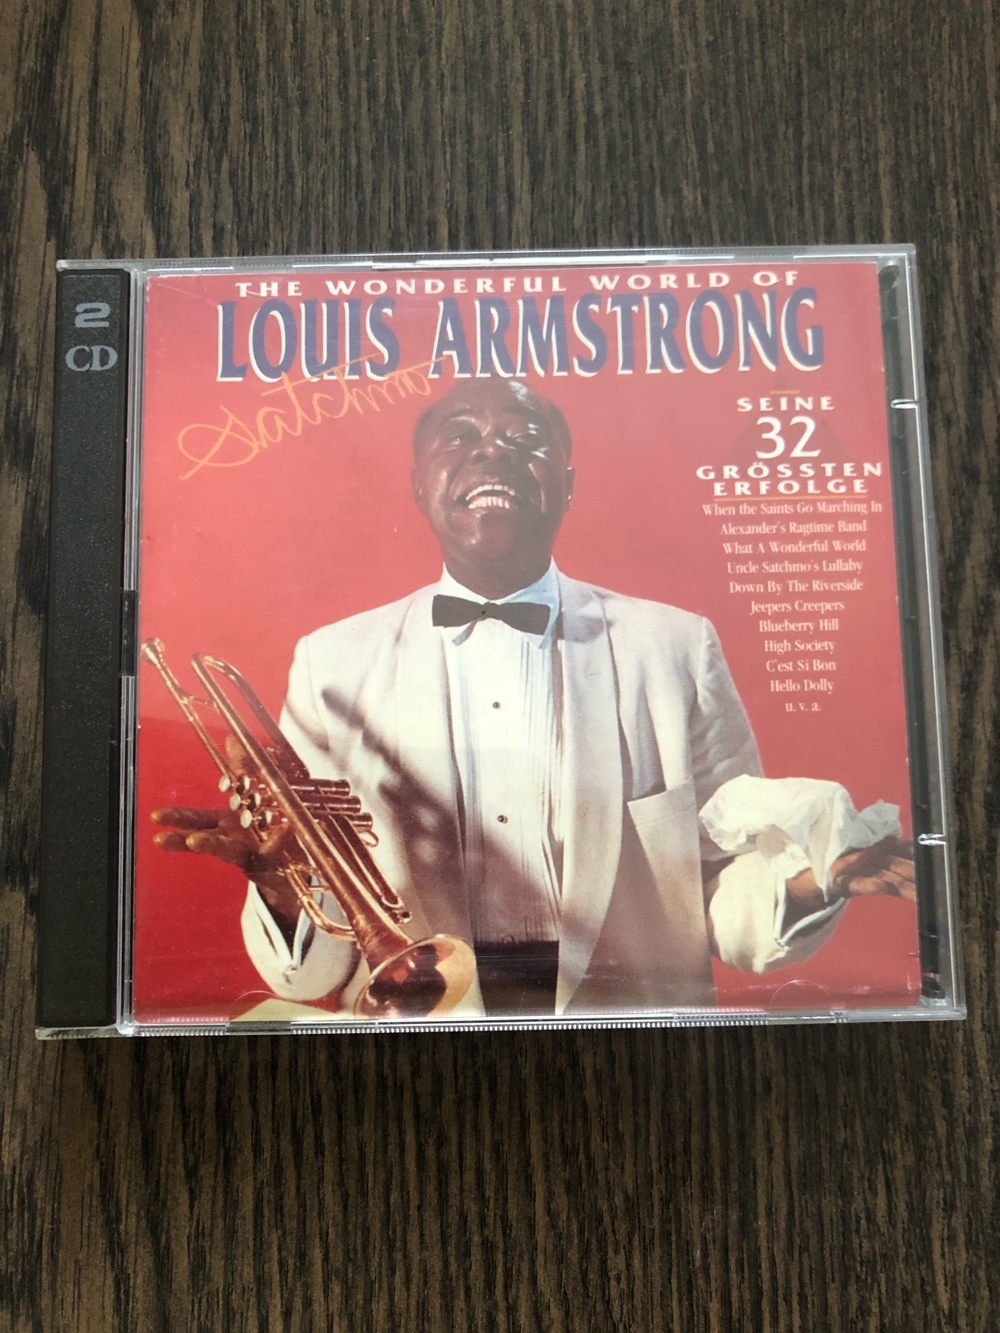 2 CDs Louis Armstrong